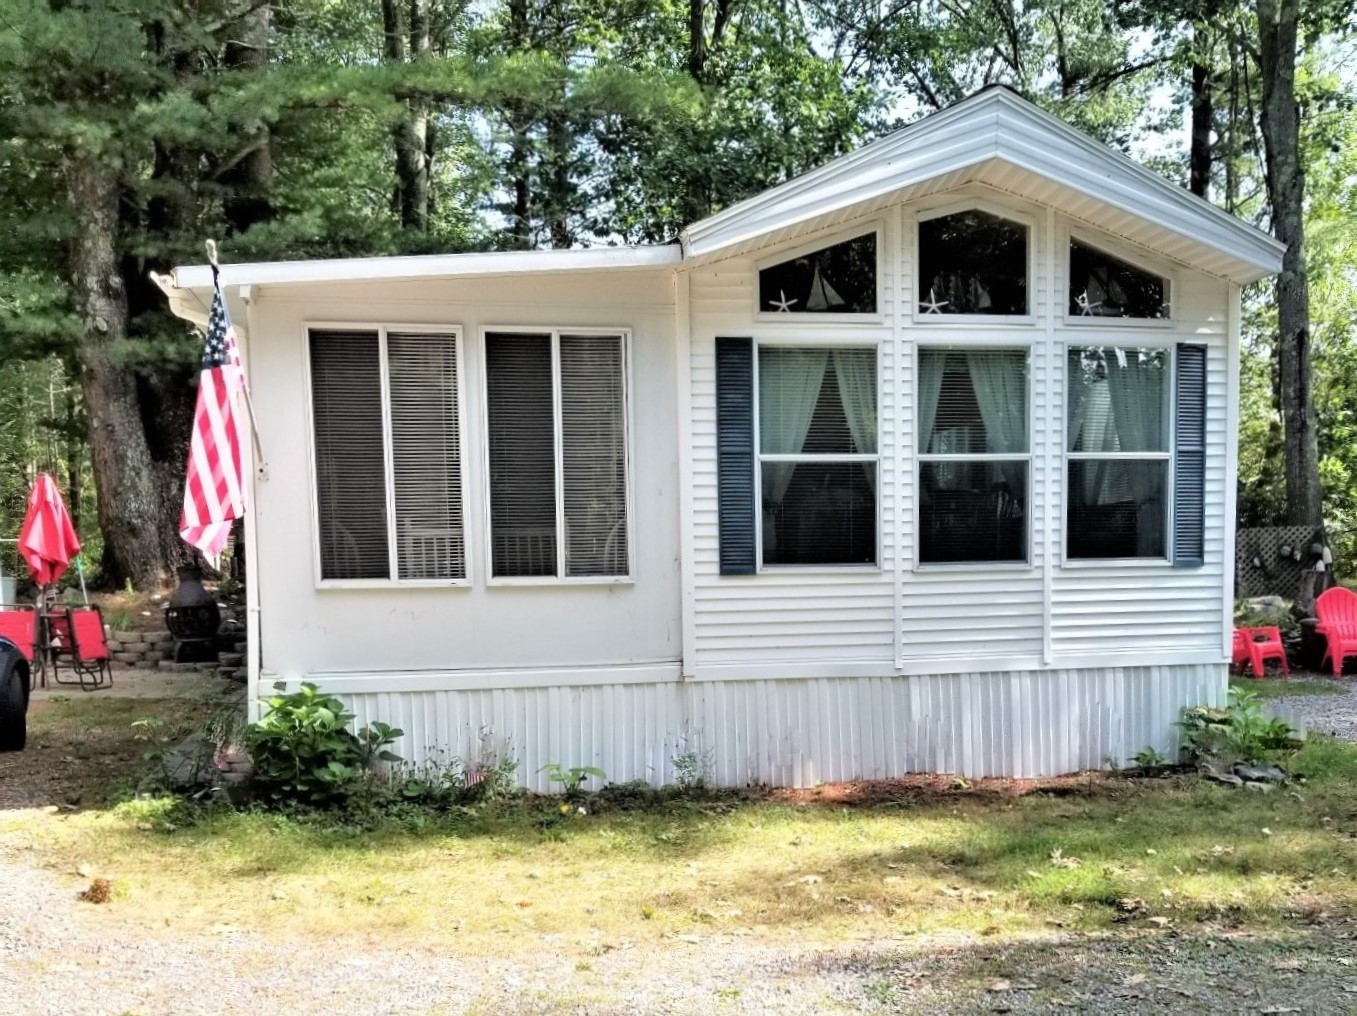 AVAILABLE – Boardwalk Bungalow – Reduced- Now Only $62,000.00